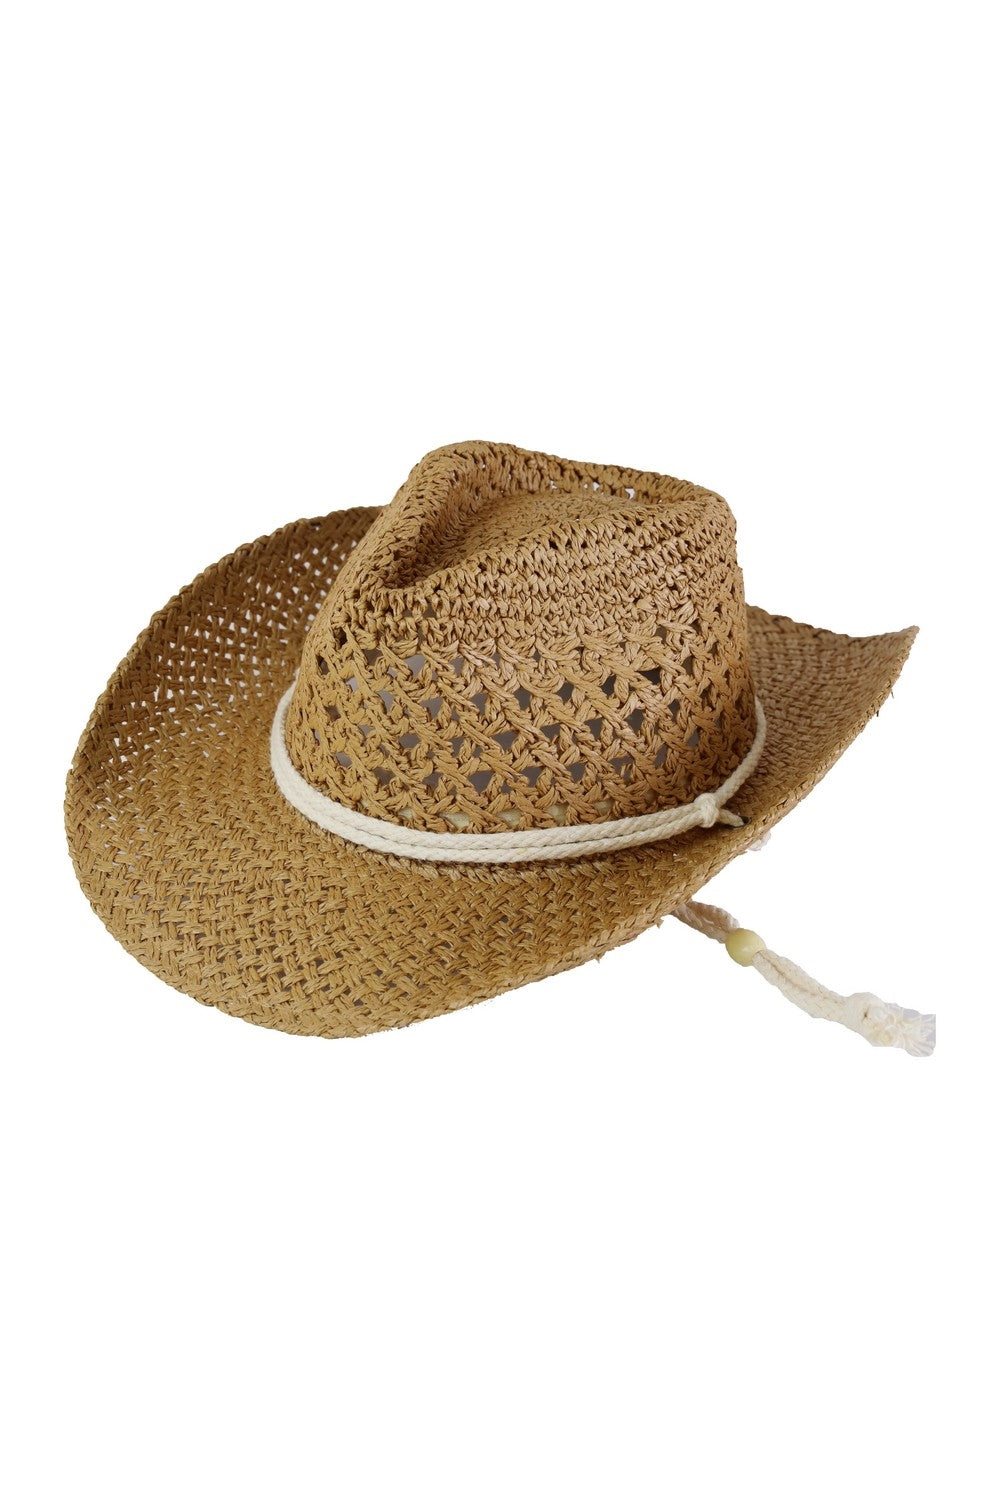 Straw Cowboy Cowgirl Handmade Hat with Chin Strap Brown - Pack of 6